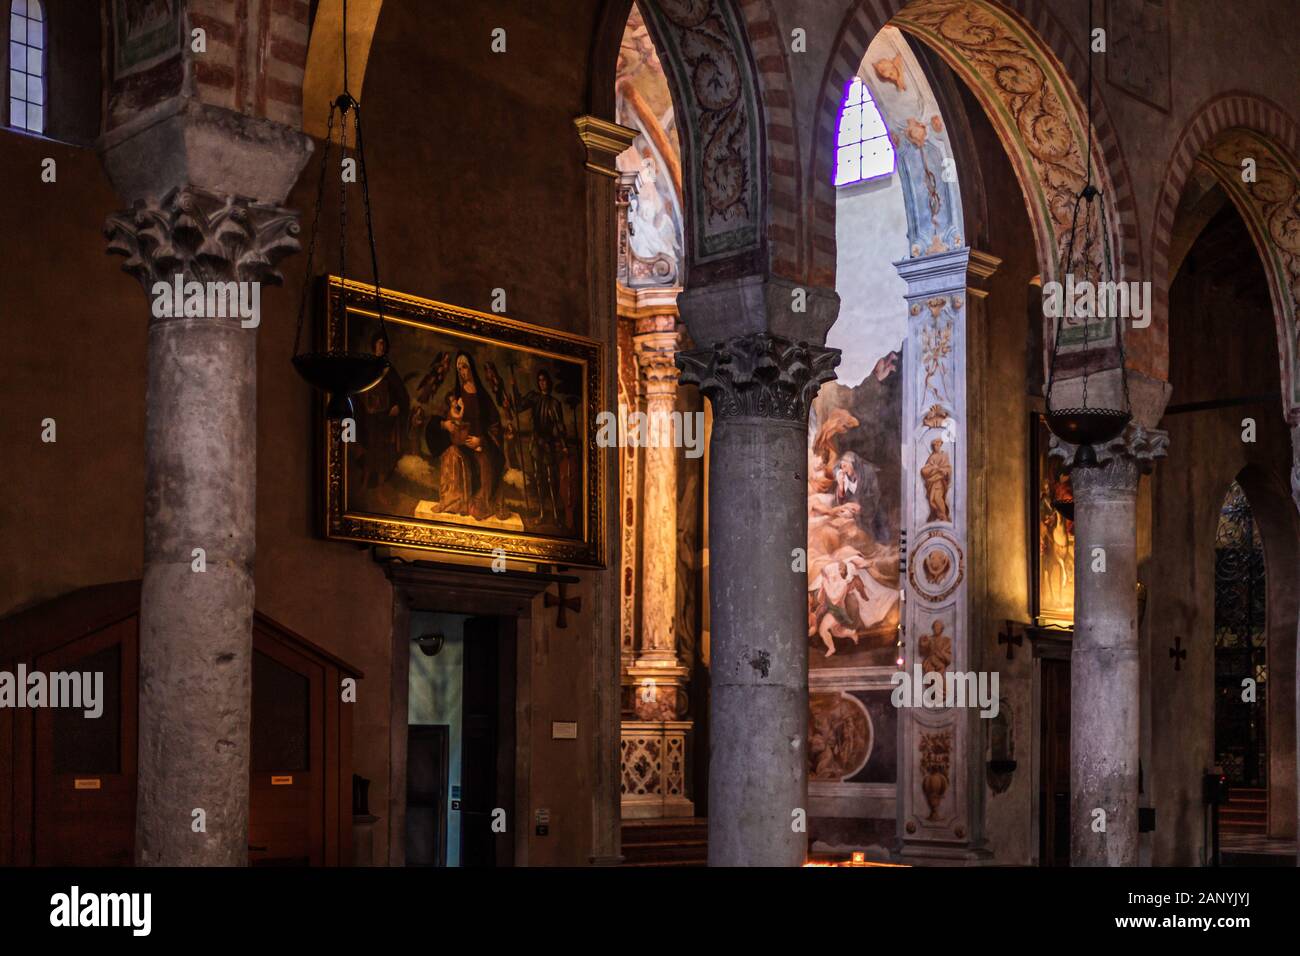 Trieste, Italy - September 2019: Interior architecture of the roman catholic cathedral 'Basilica cattedrale di san giusto martire'. It's dedicated to Stock Photo